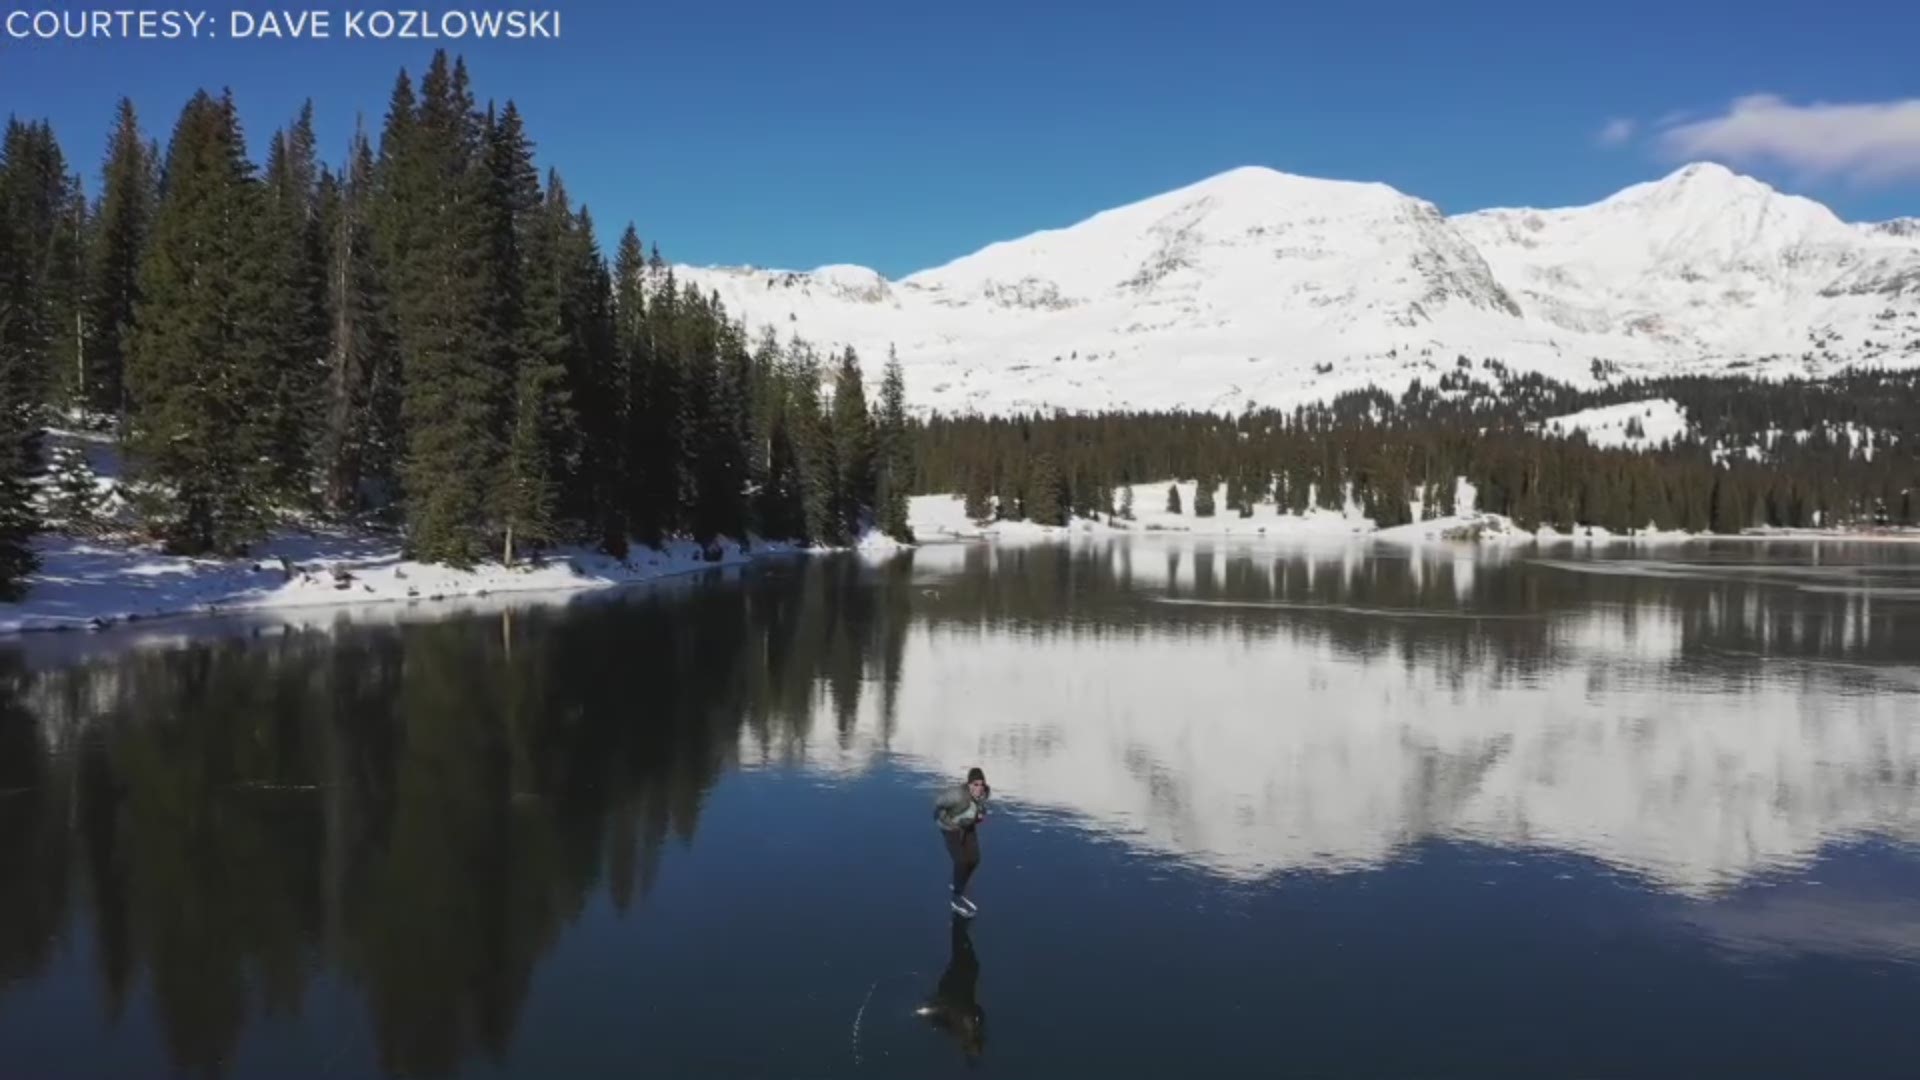 Dave Kozlowski has been speed skating across lakes in Colorado for years. His video is the Most Colorado Thing We Saw Today (via Next with Kyle Clark).